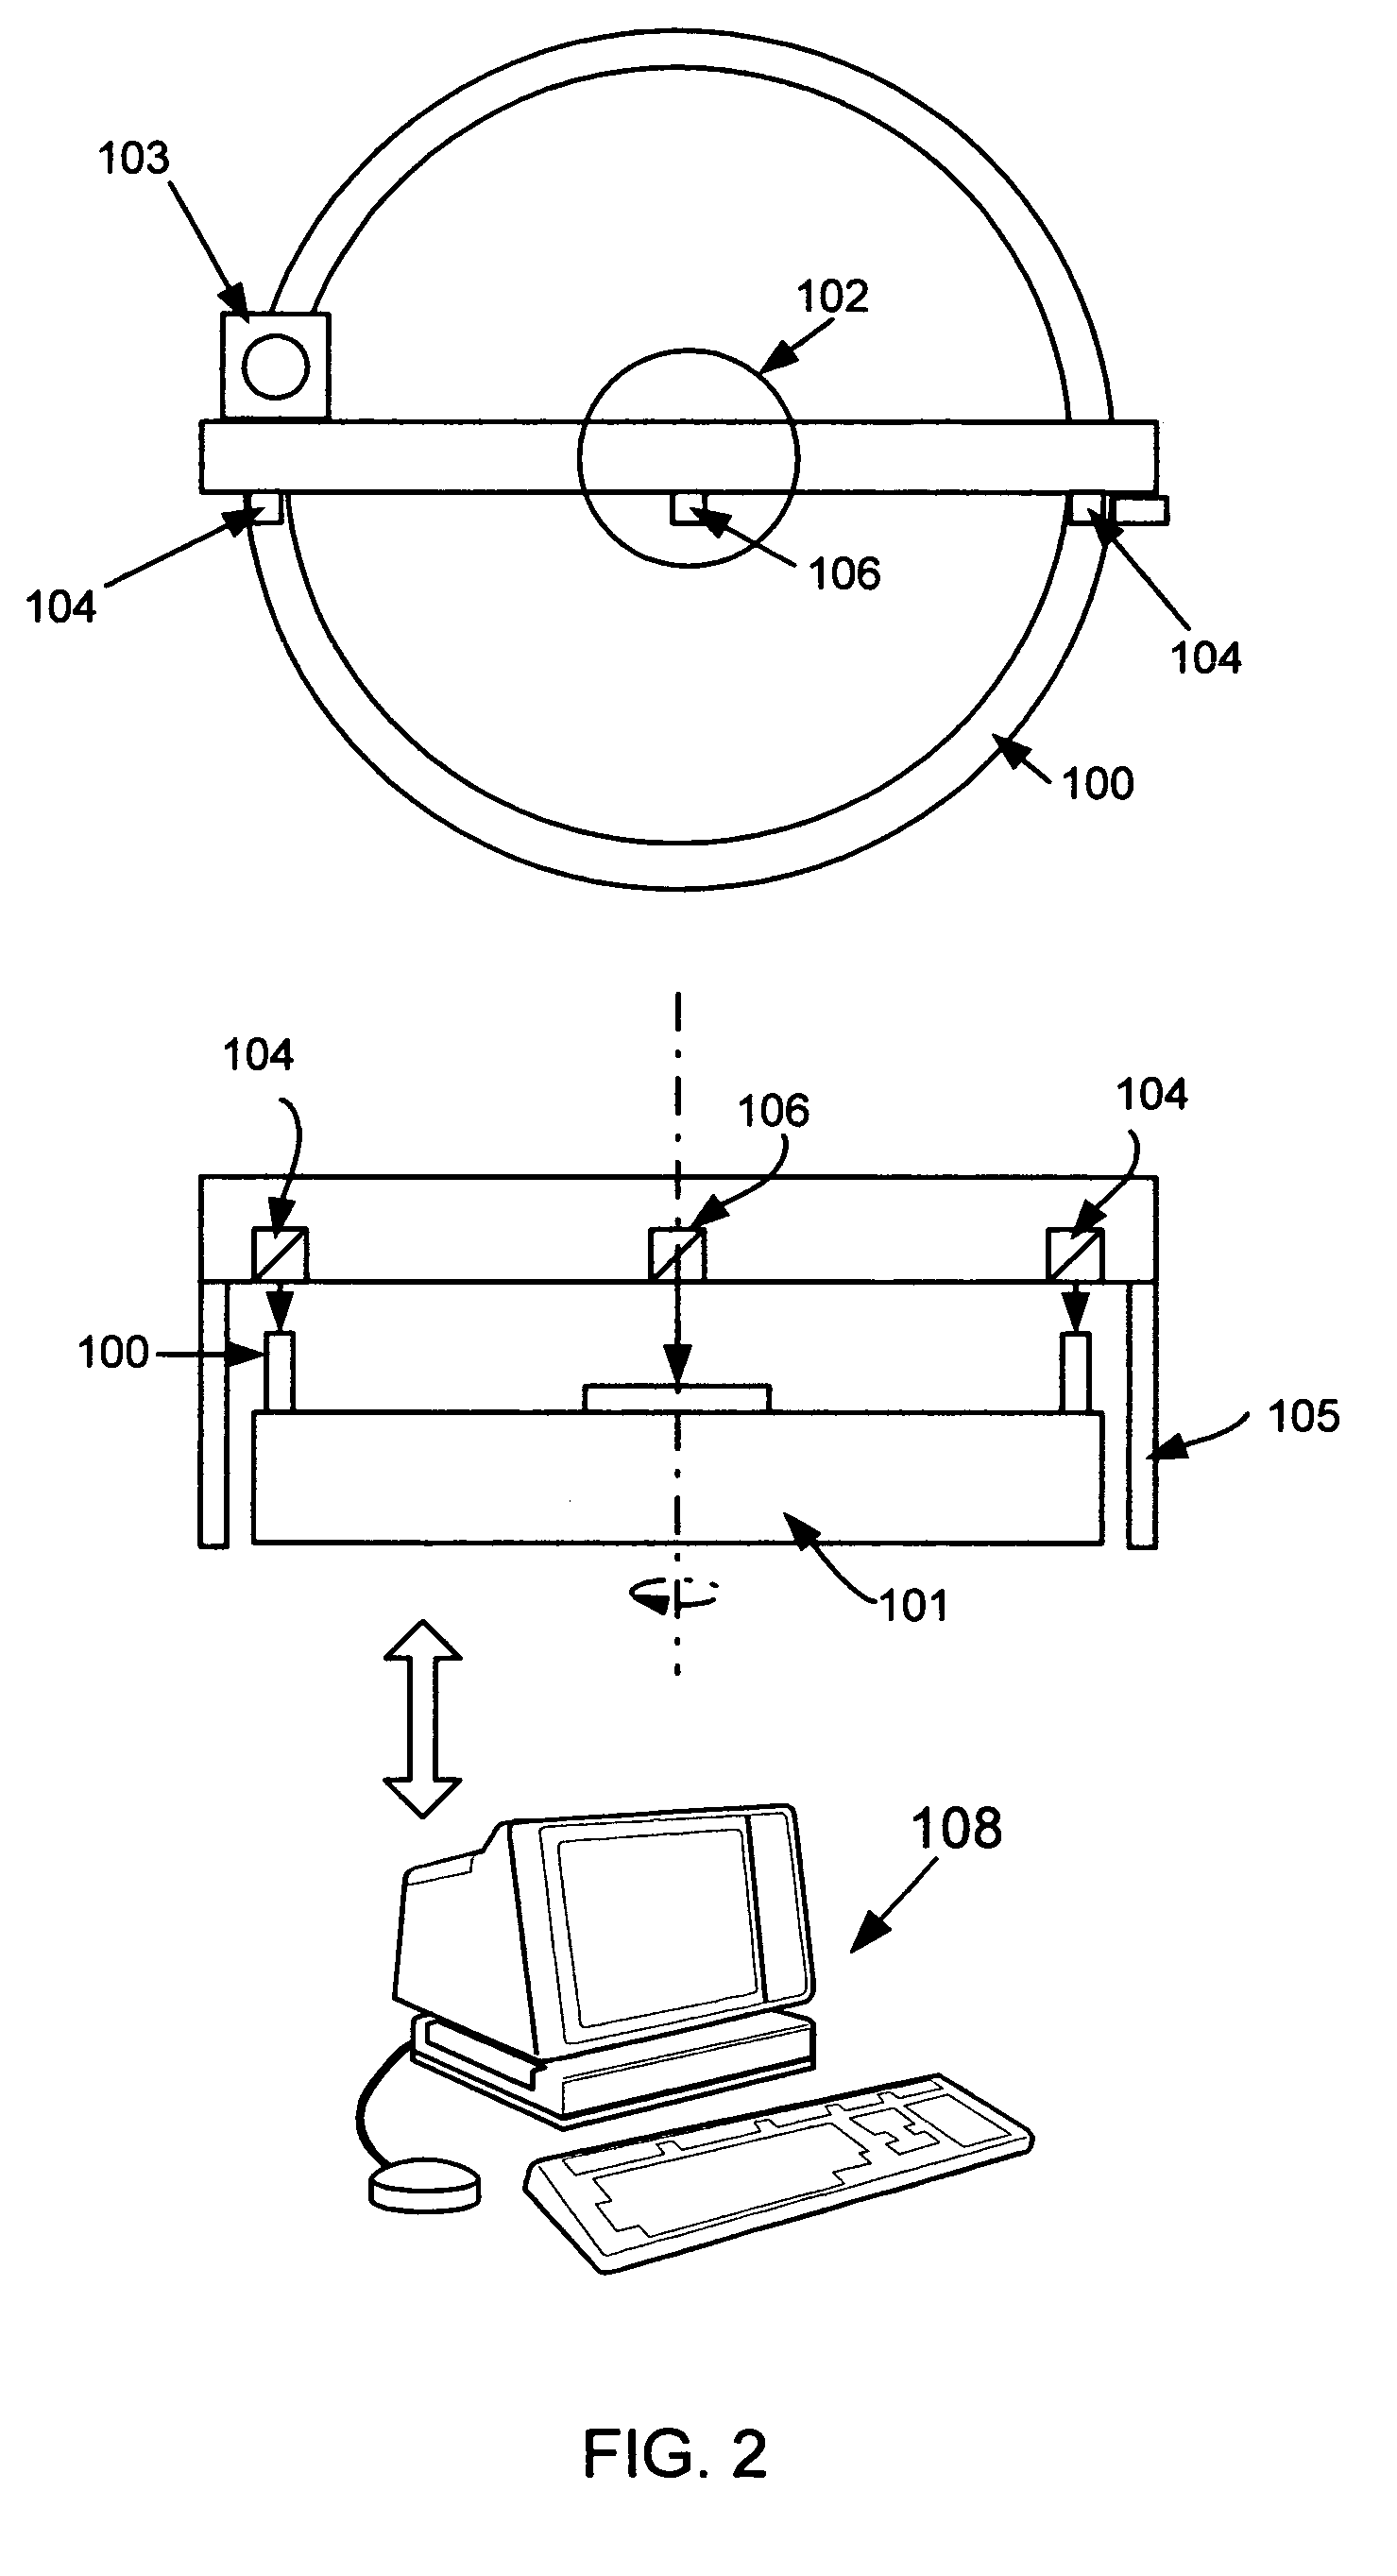 Method and apparatus for interferometric measurement of components with large aspect ratios